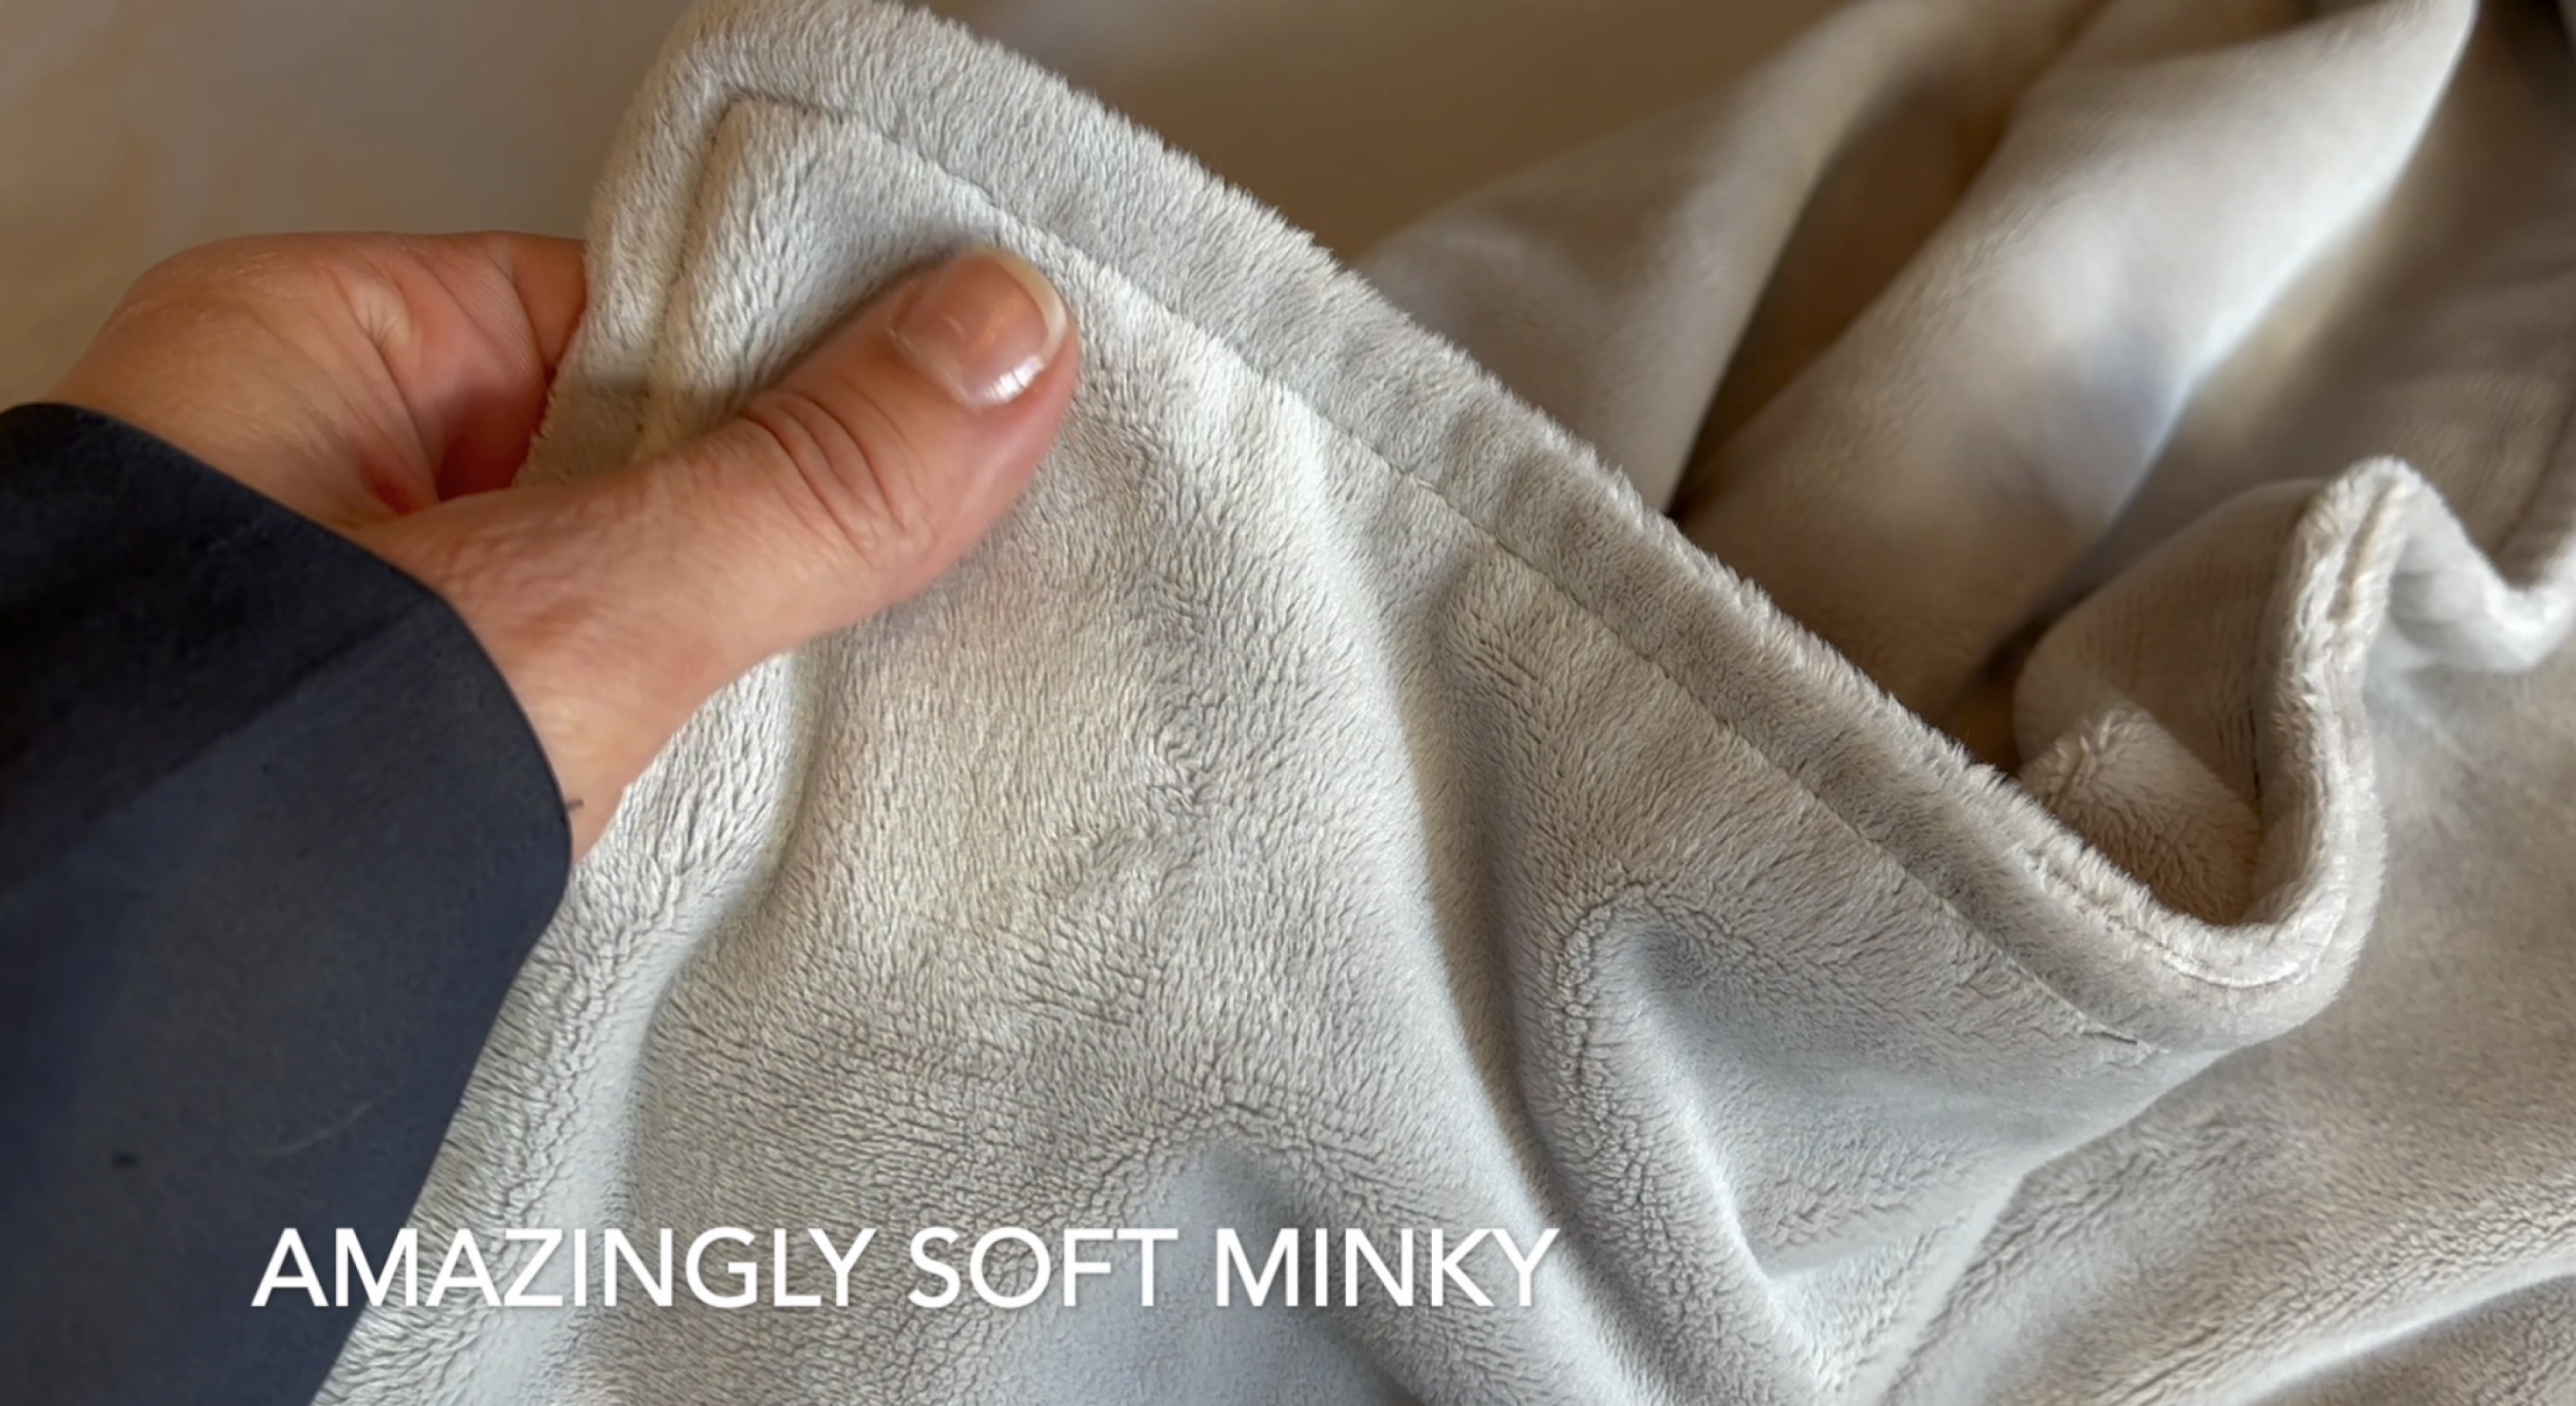 What is Minky Fabric?